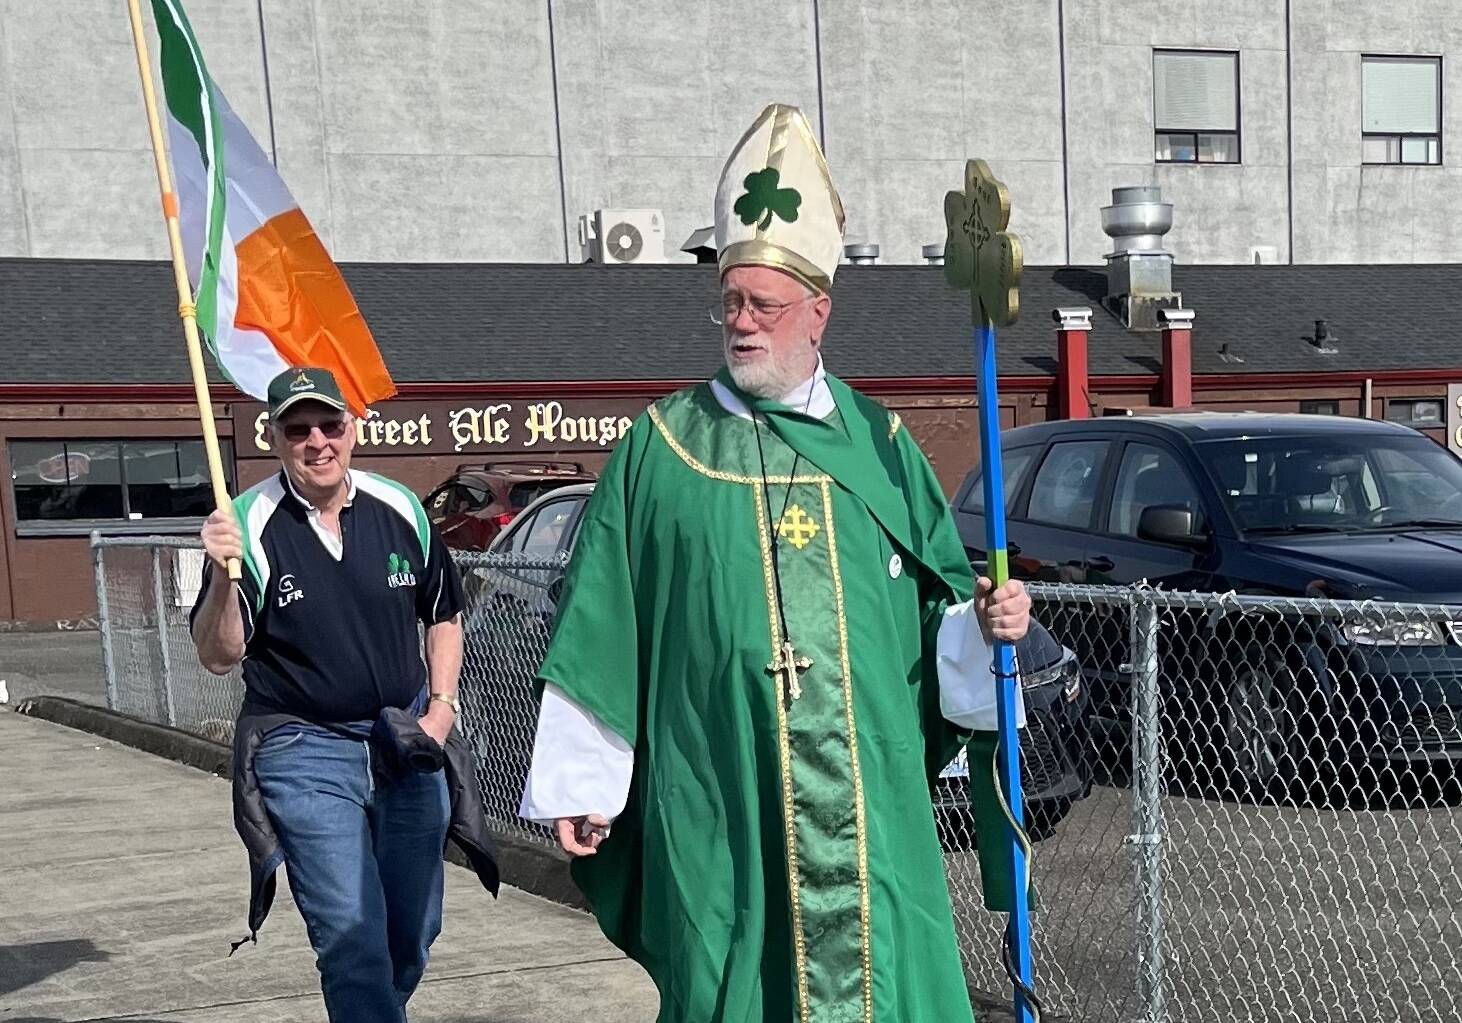 Bill Gibbons, costumed as St. Patrick, leads a St. Patrick’s Day Parade from the 8th Street Ale House in Hoqiuam. (Courtesy photo / Linda Gibbons)